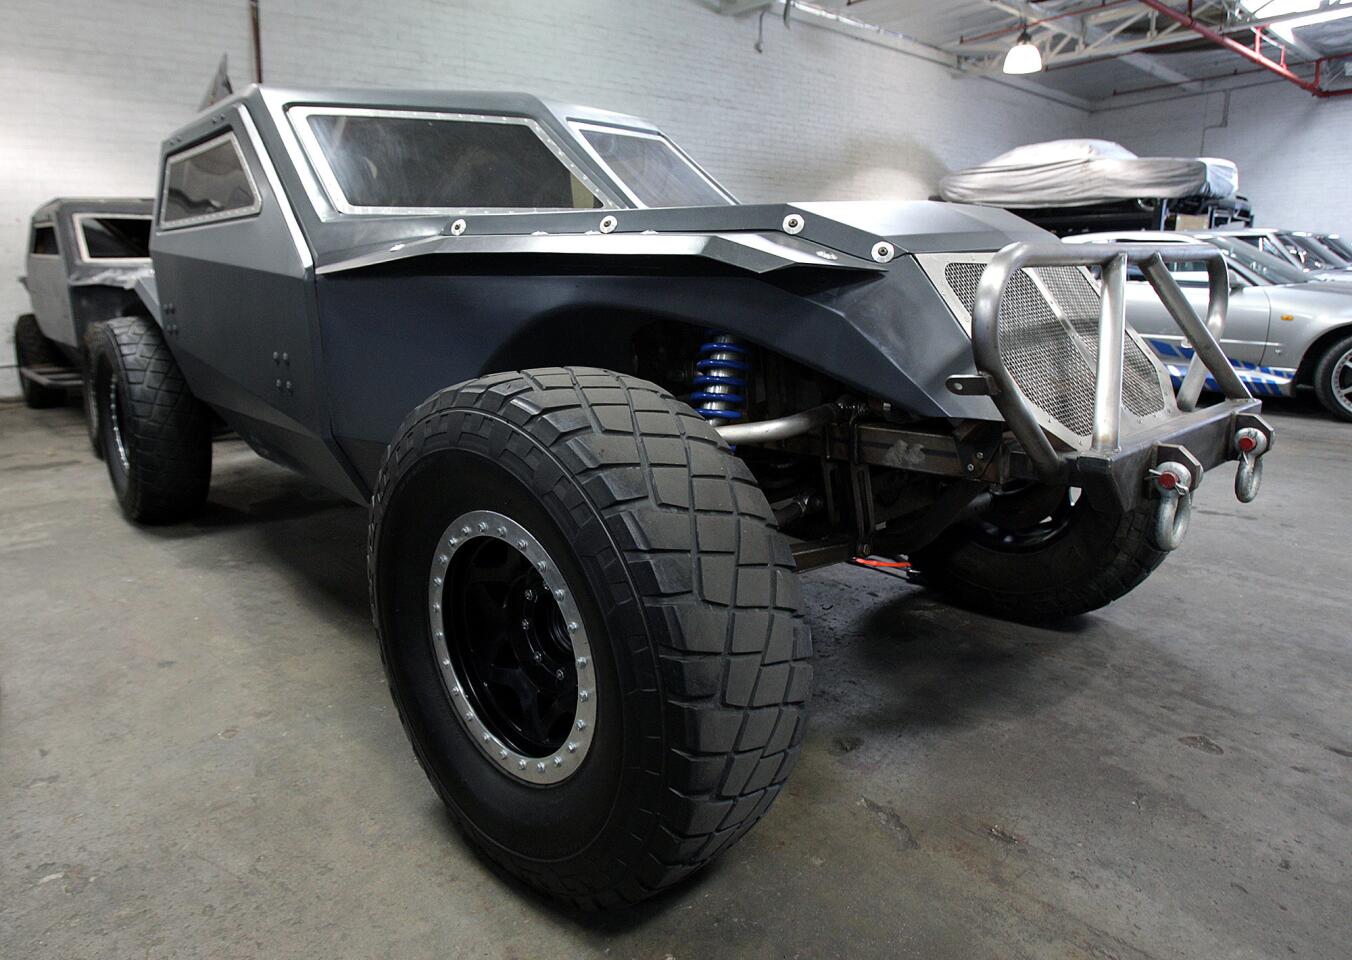 Photo Gallery: Fast and Furious car creators at Vehicle Effects, Inc.